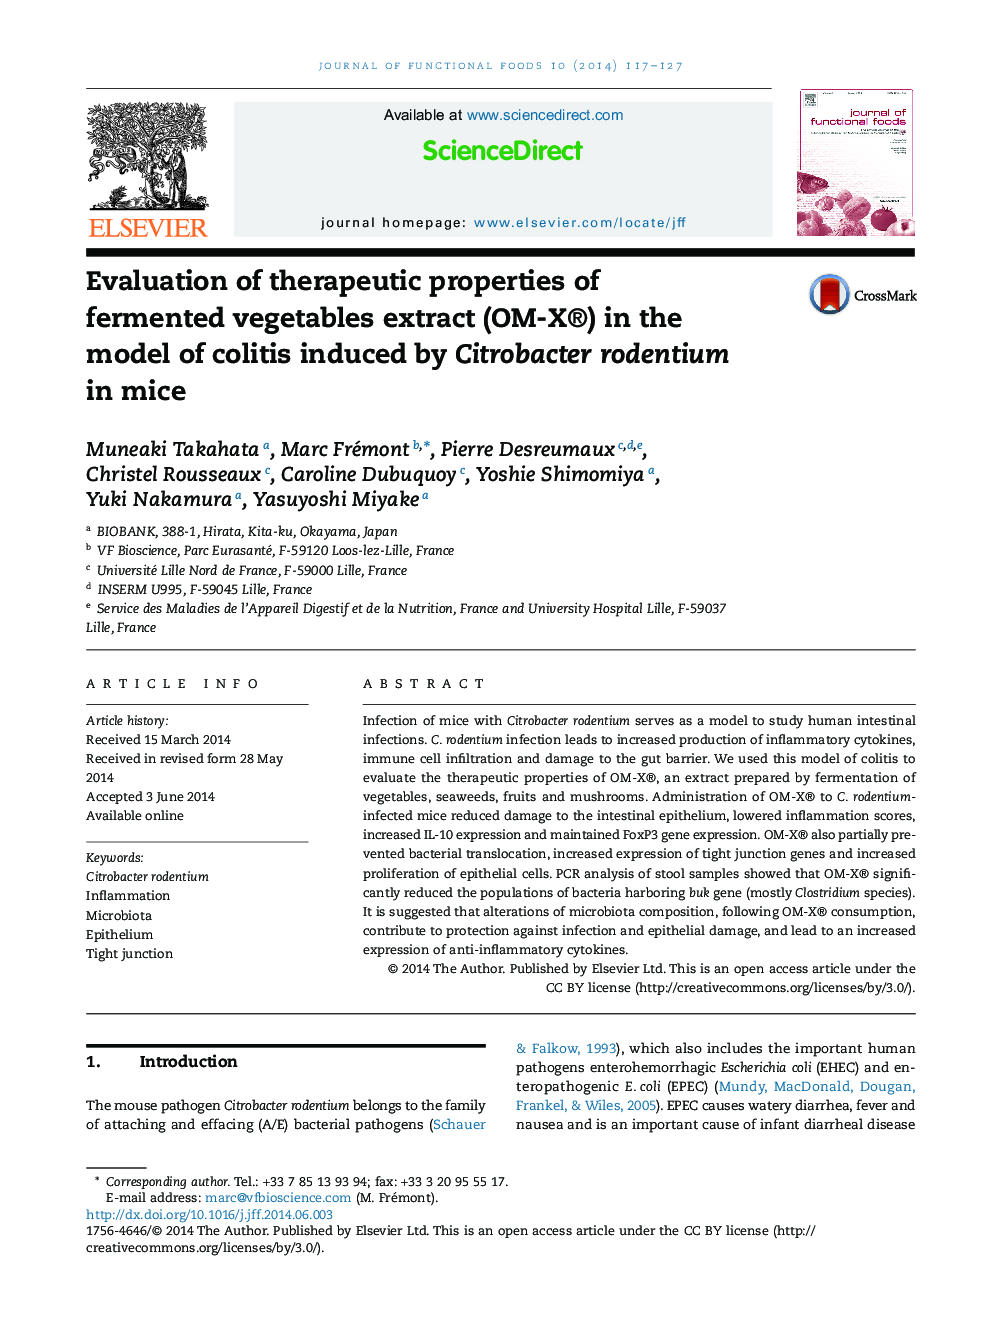 Evaluation of therapeutic properties of fermented vegetables extract (OM-X®) in the model of colitis induced by Citrobacter rodentium in mice